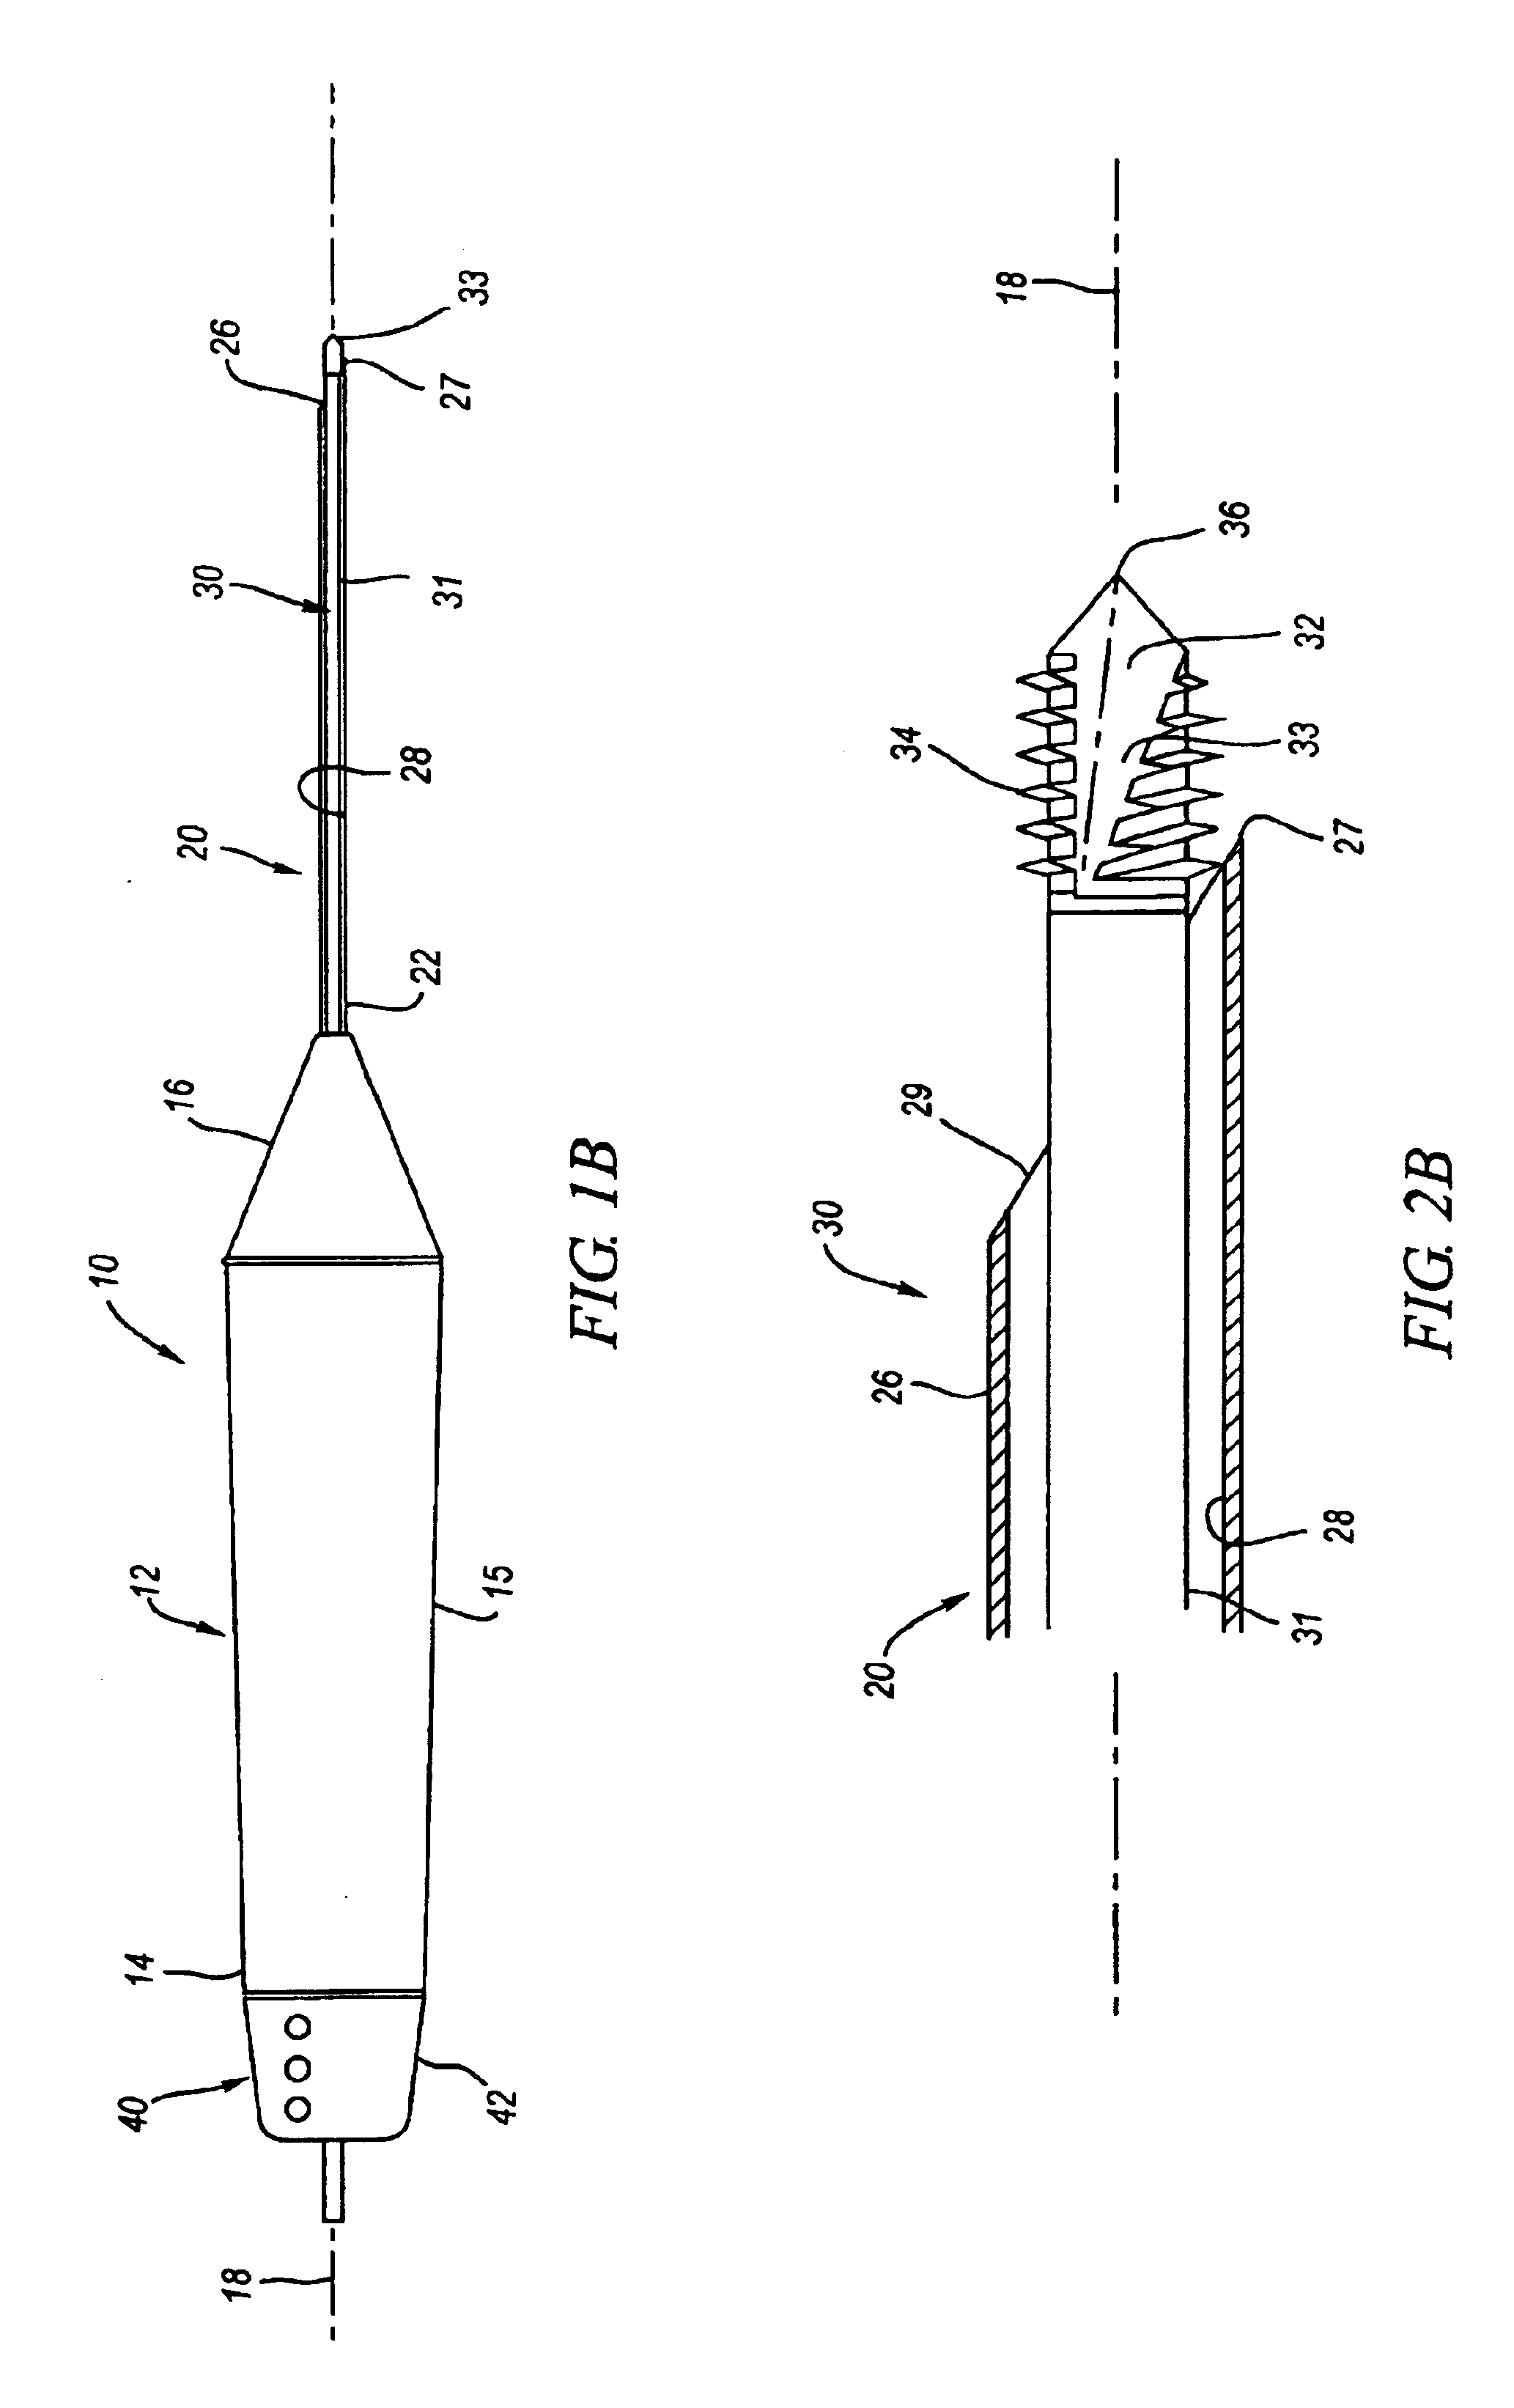 Apparatus and methods for delivering energy to a target site within bone